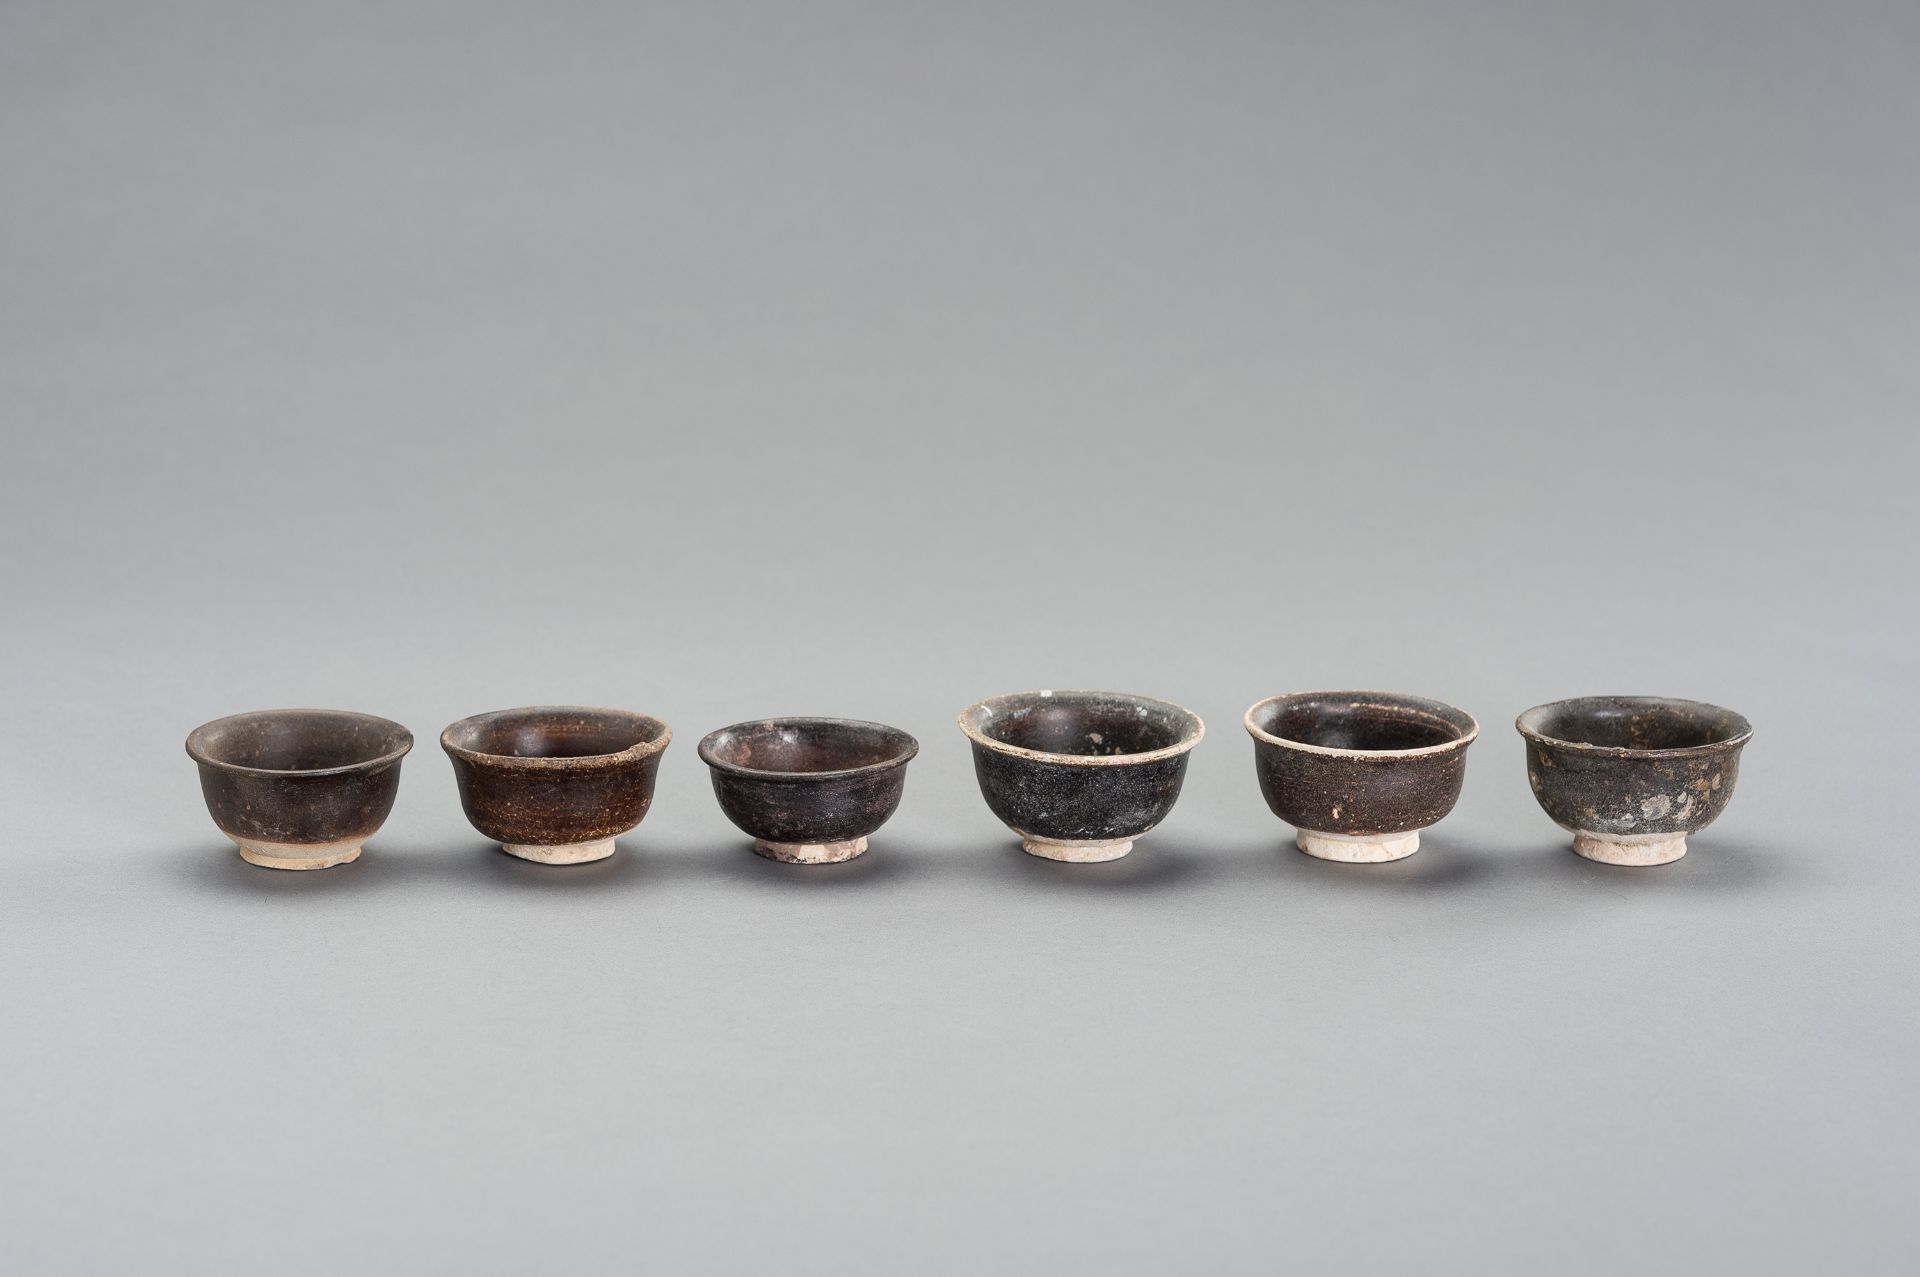 SIX FOOTED 'SHIPWRECK' CERAMIC CUPS